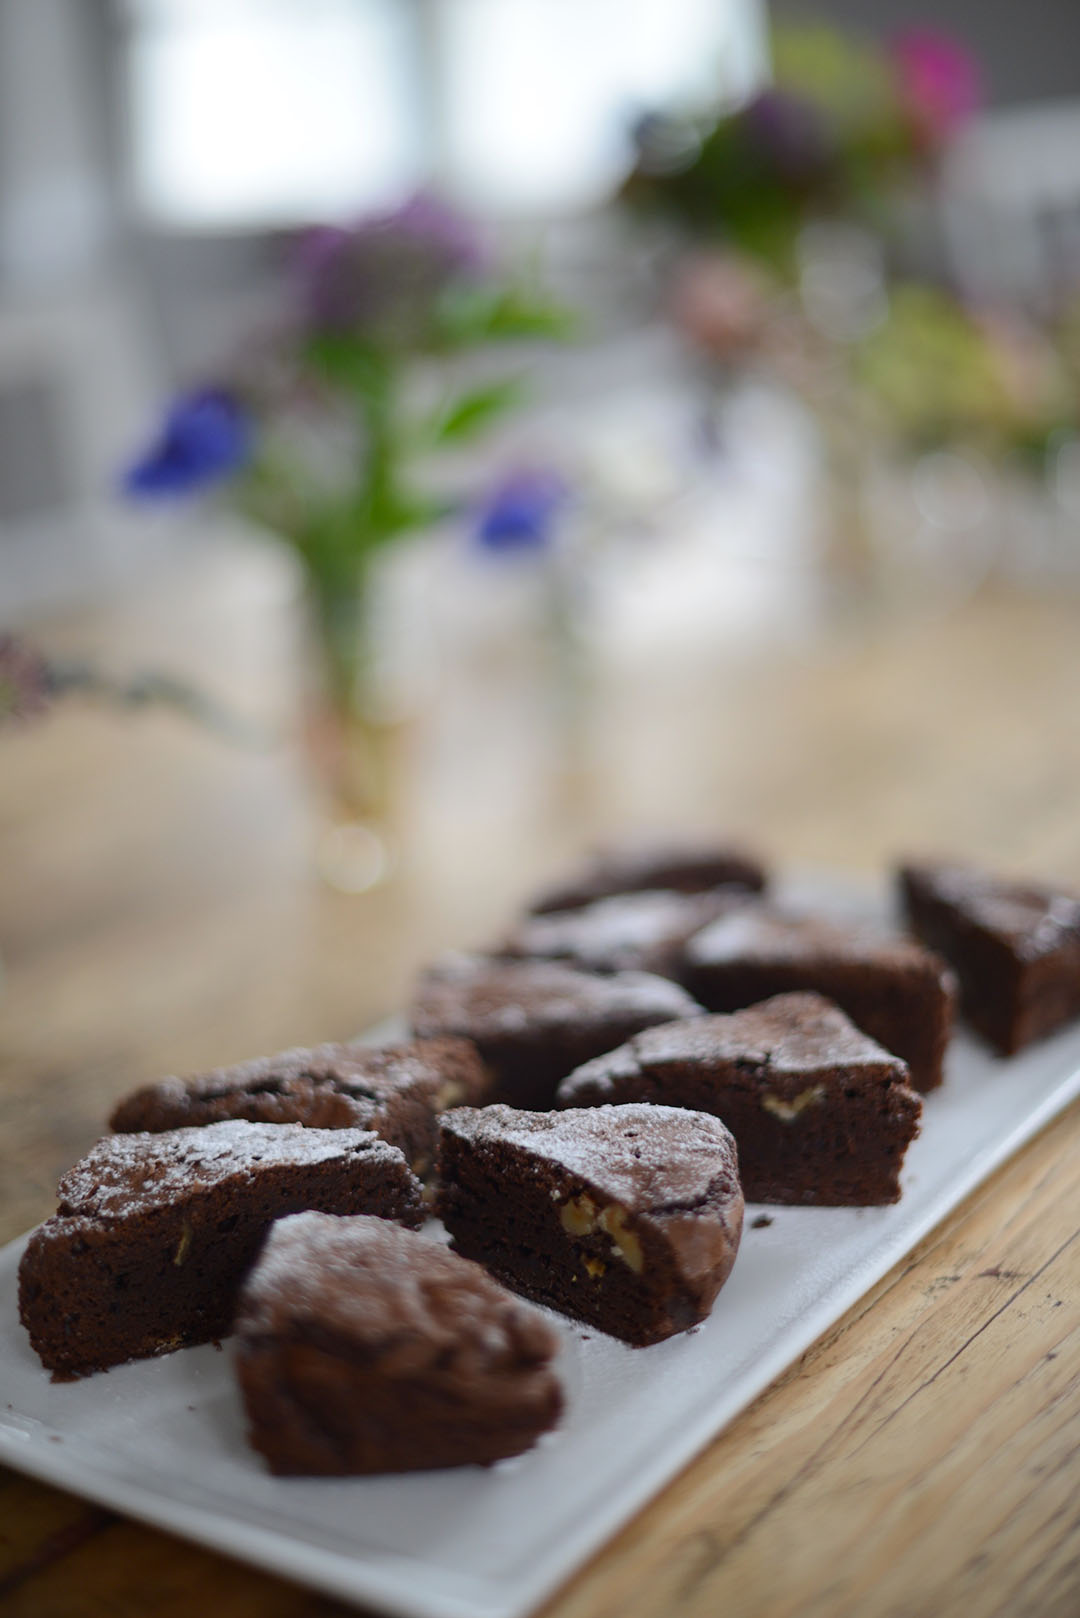 chocolate brownies at abinger cookery school photographed by sara delaney